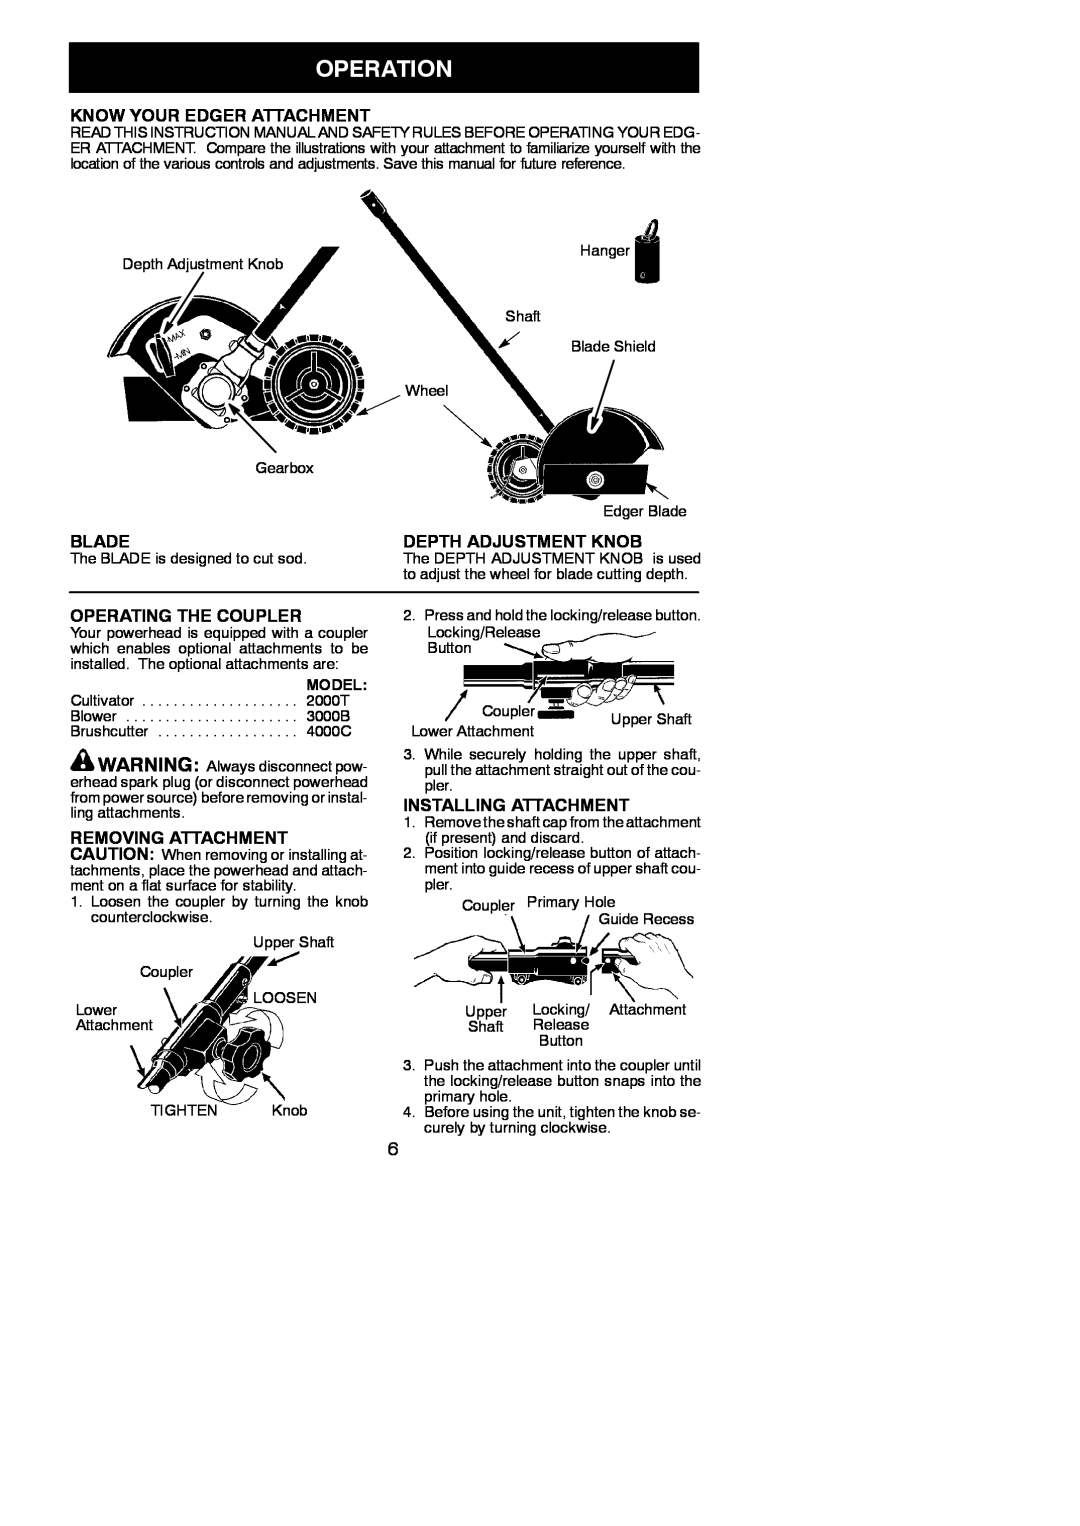 Weed Eater 1000E Operation, Know Your Edger Attachment, Blade, Depth Adjustment Knob, Operating The Coupler, Model 